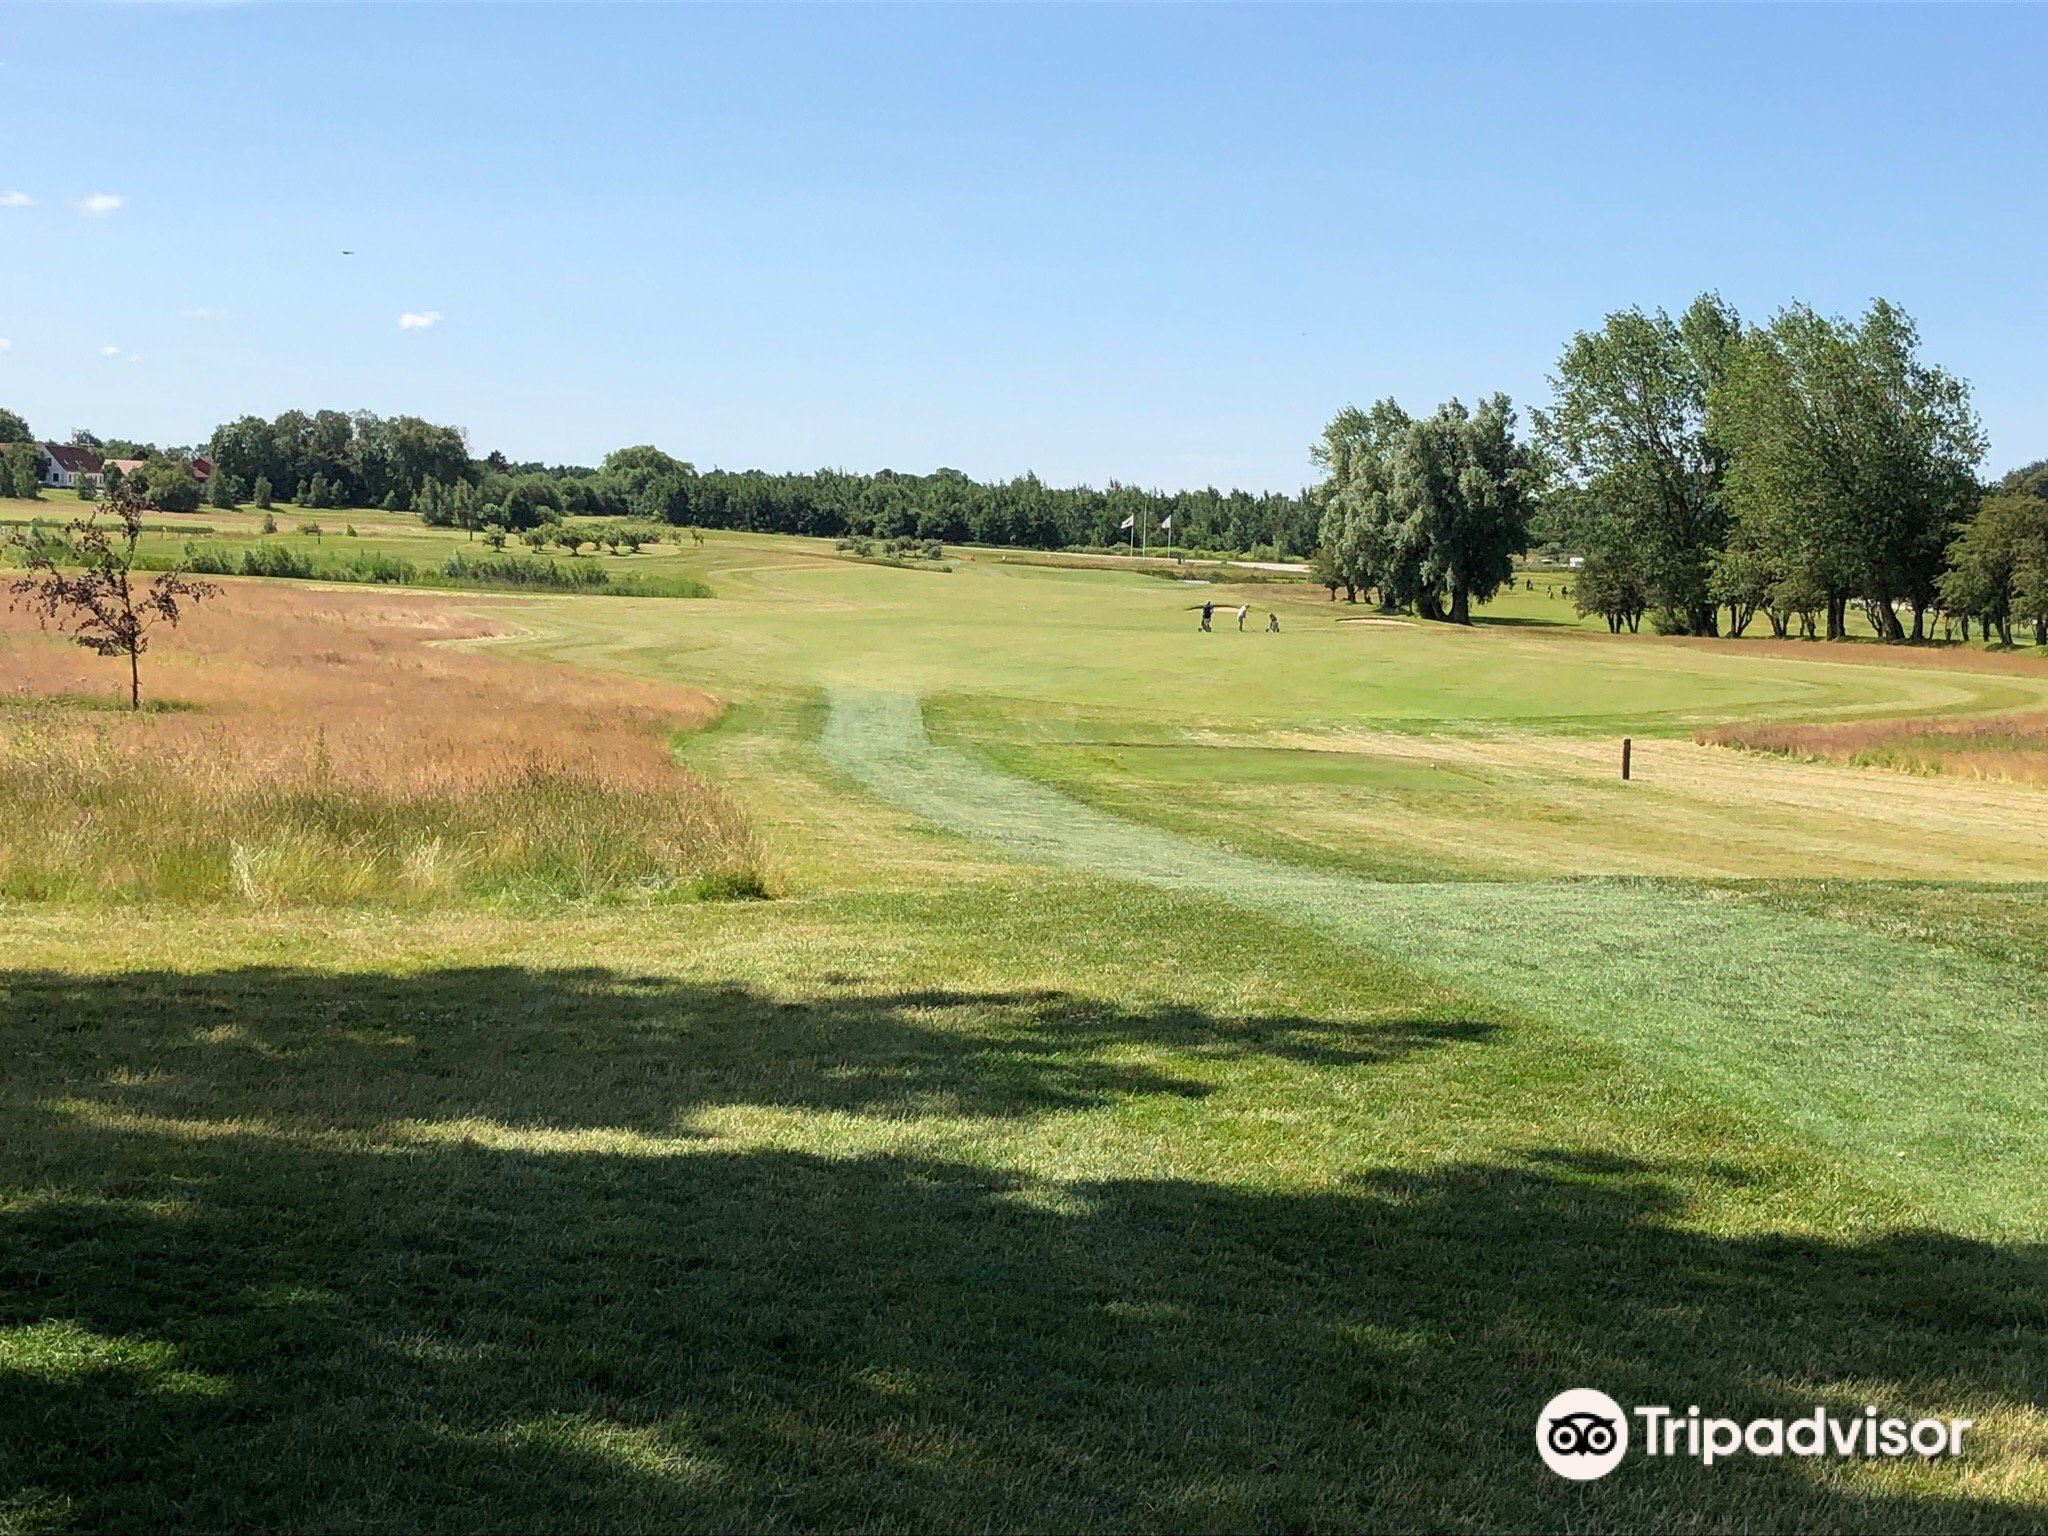 Greve Golfklub attraction reviews - Greve Golfklub tickets - Greve Golfklub discounts - Greve Golfklub transportation, address, opening hours - attractions, hotels, and food near Greve - Trip.com